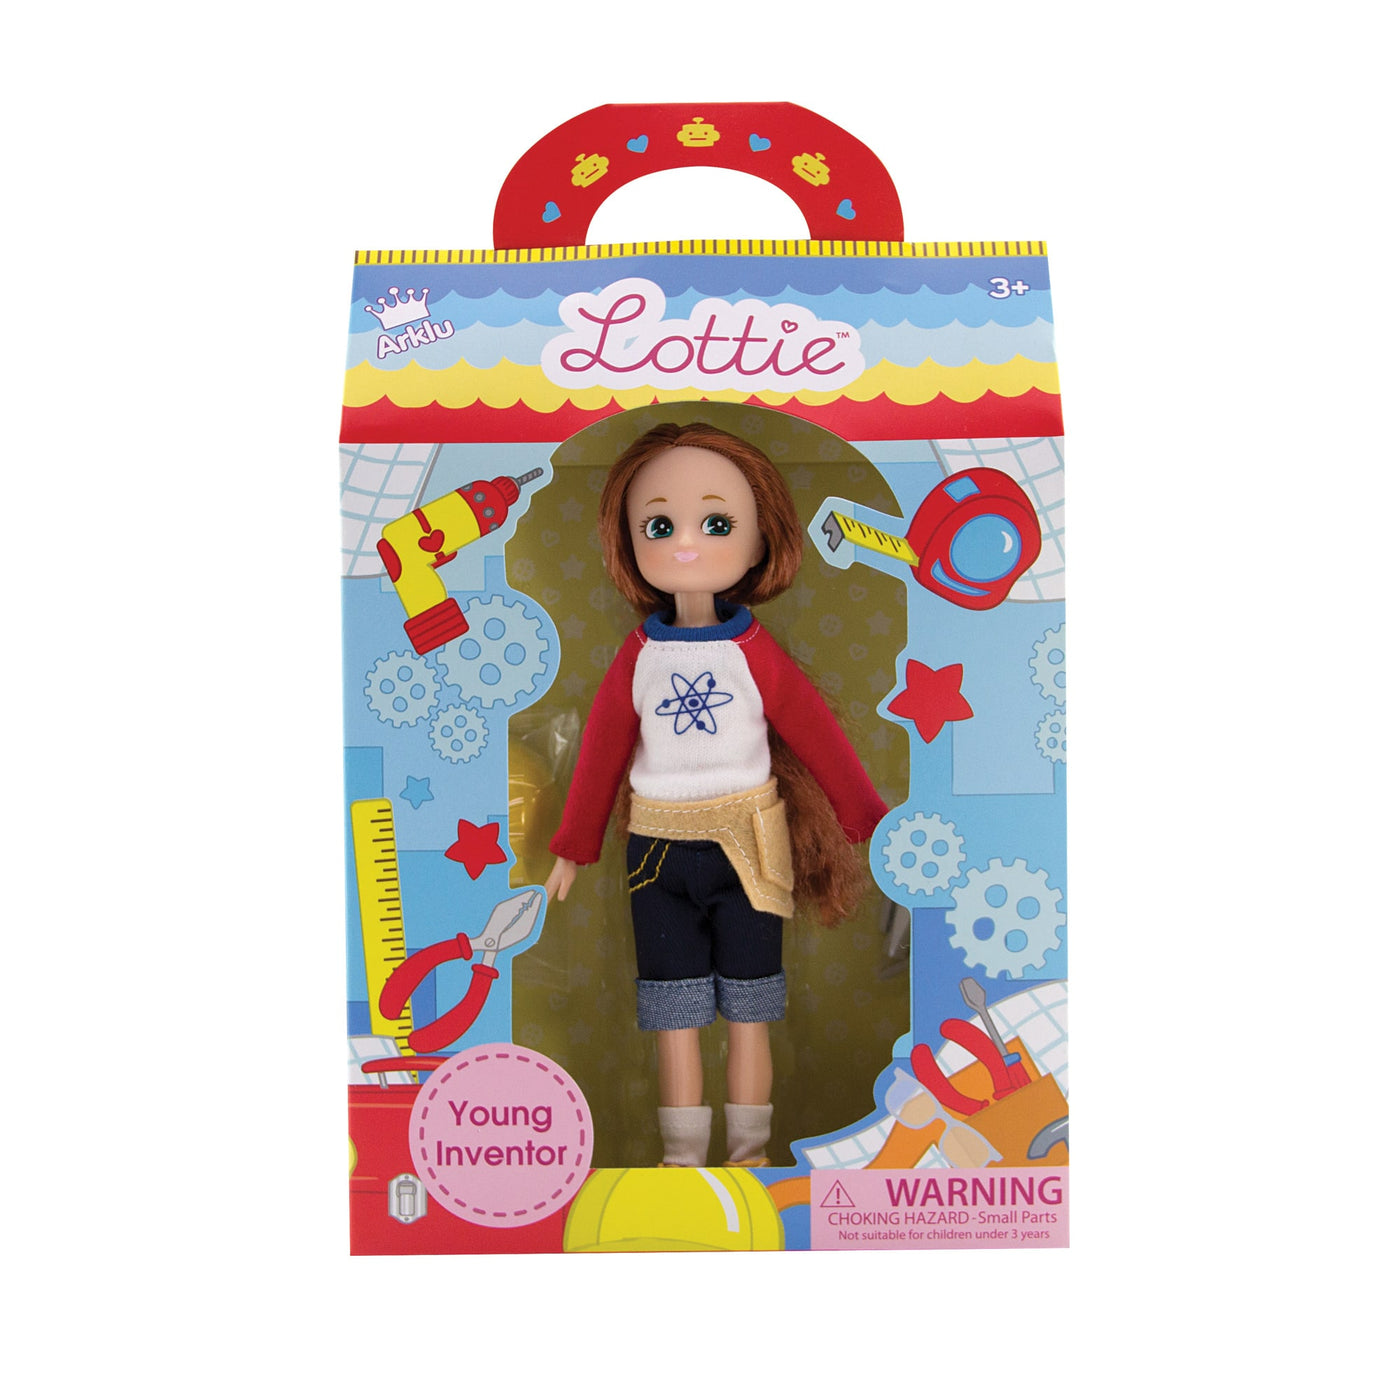 YOUNG INVENTOR - LOTTIE